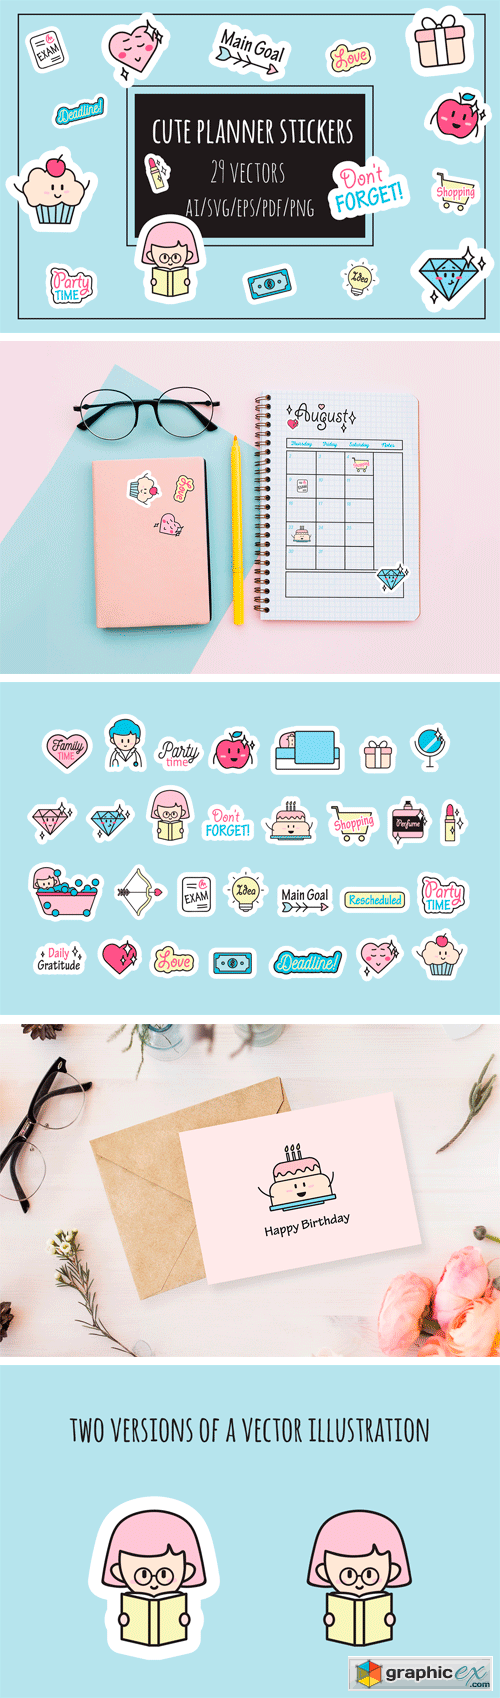 cute planner stickers free download vector stock image photoshop icon